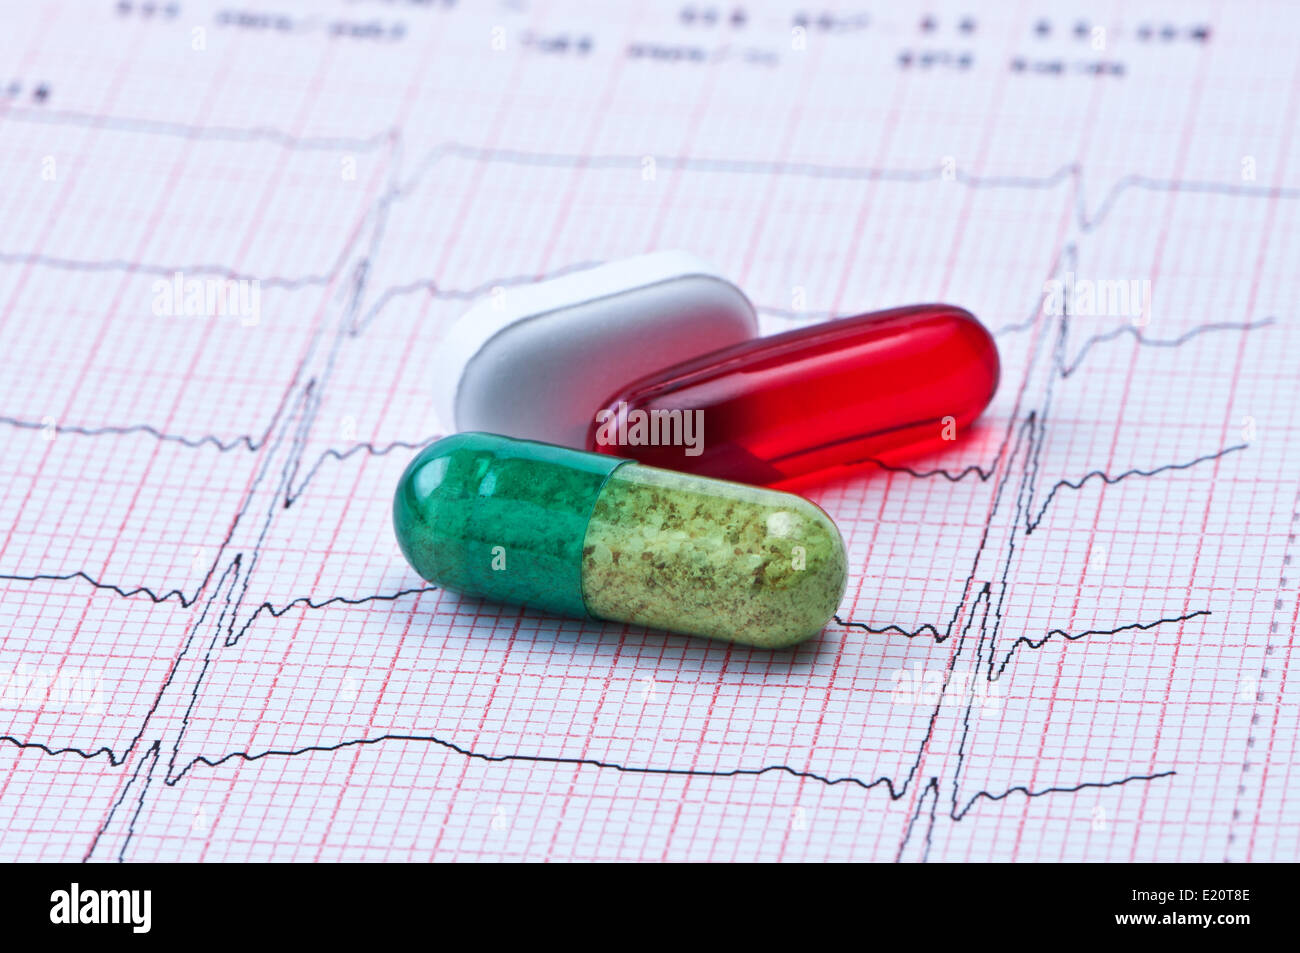 Tablet and capsule on cardiogram. Stock Photo